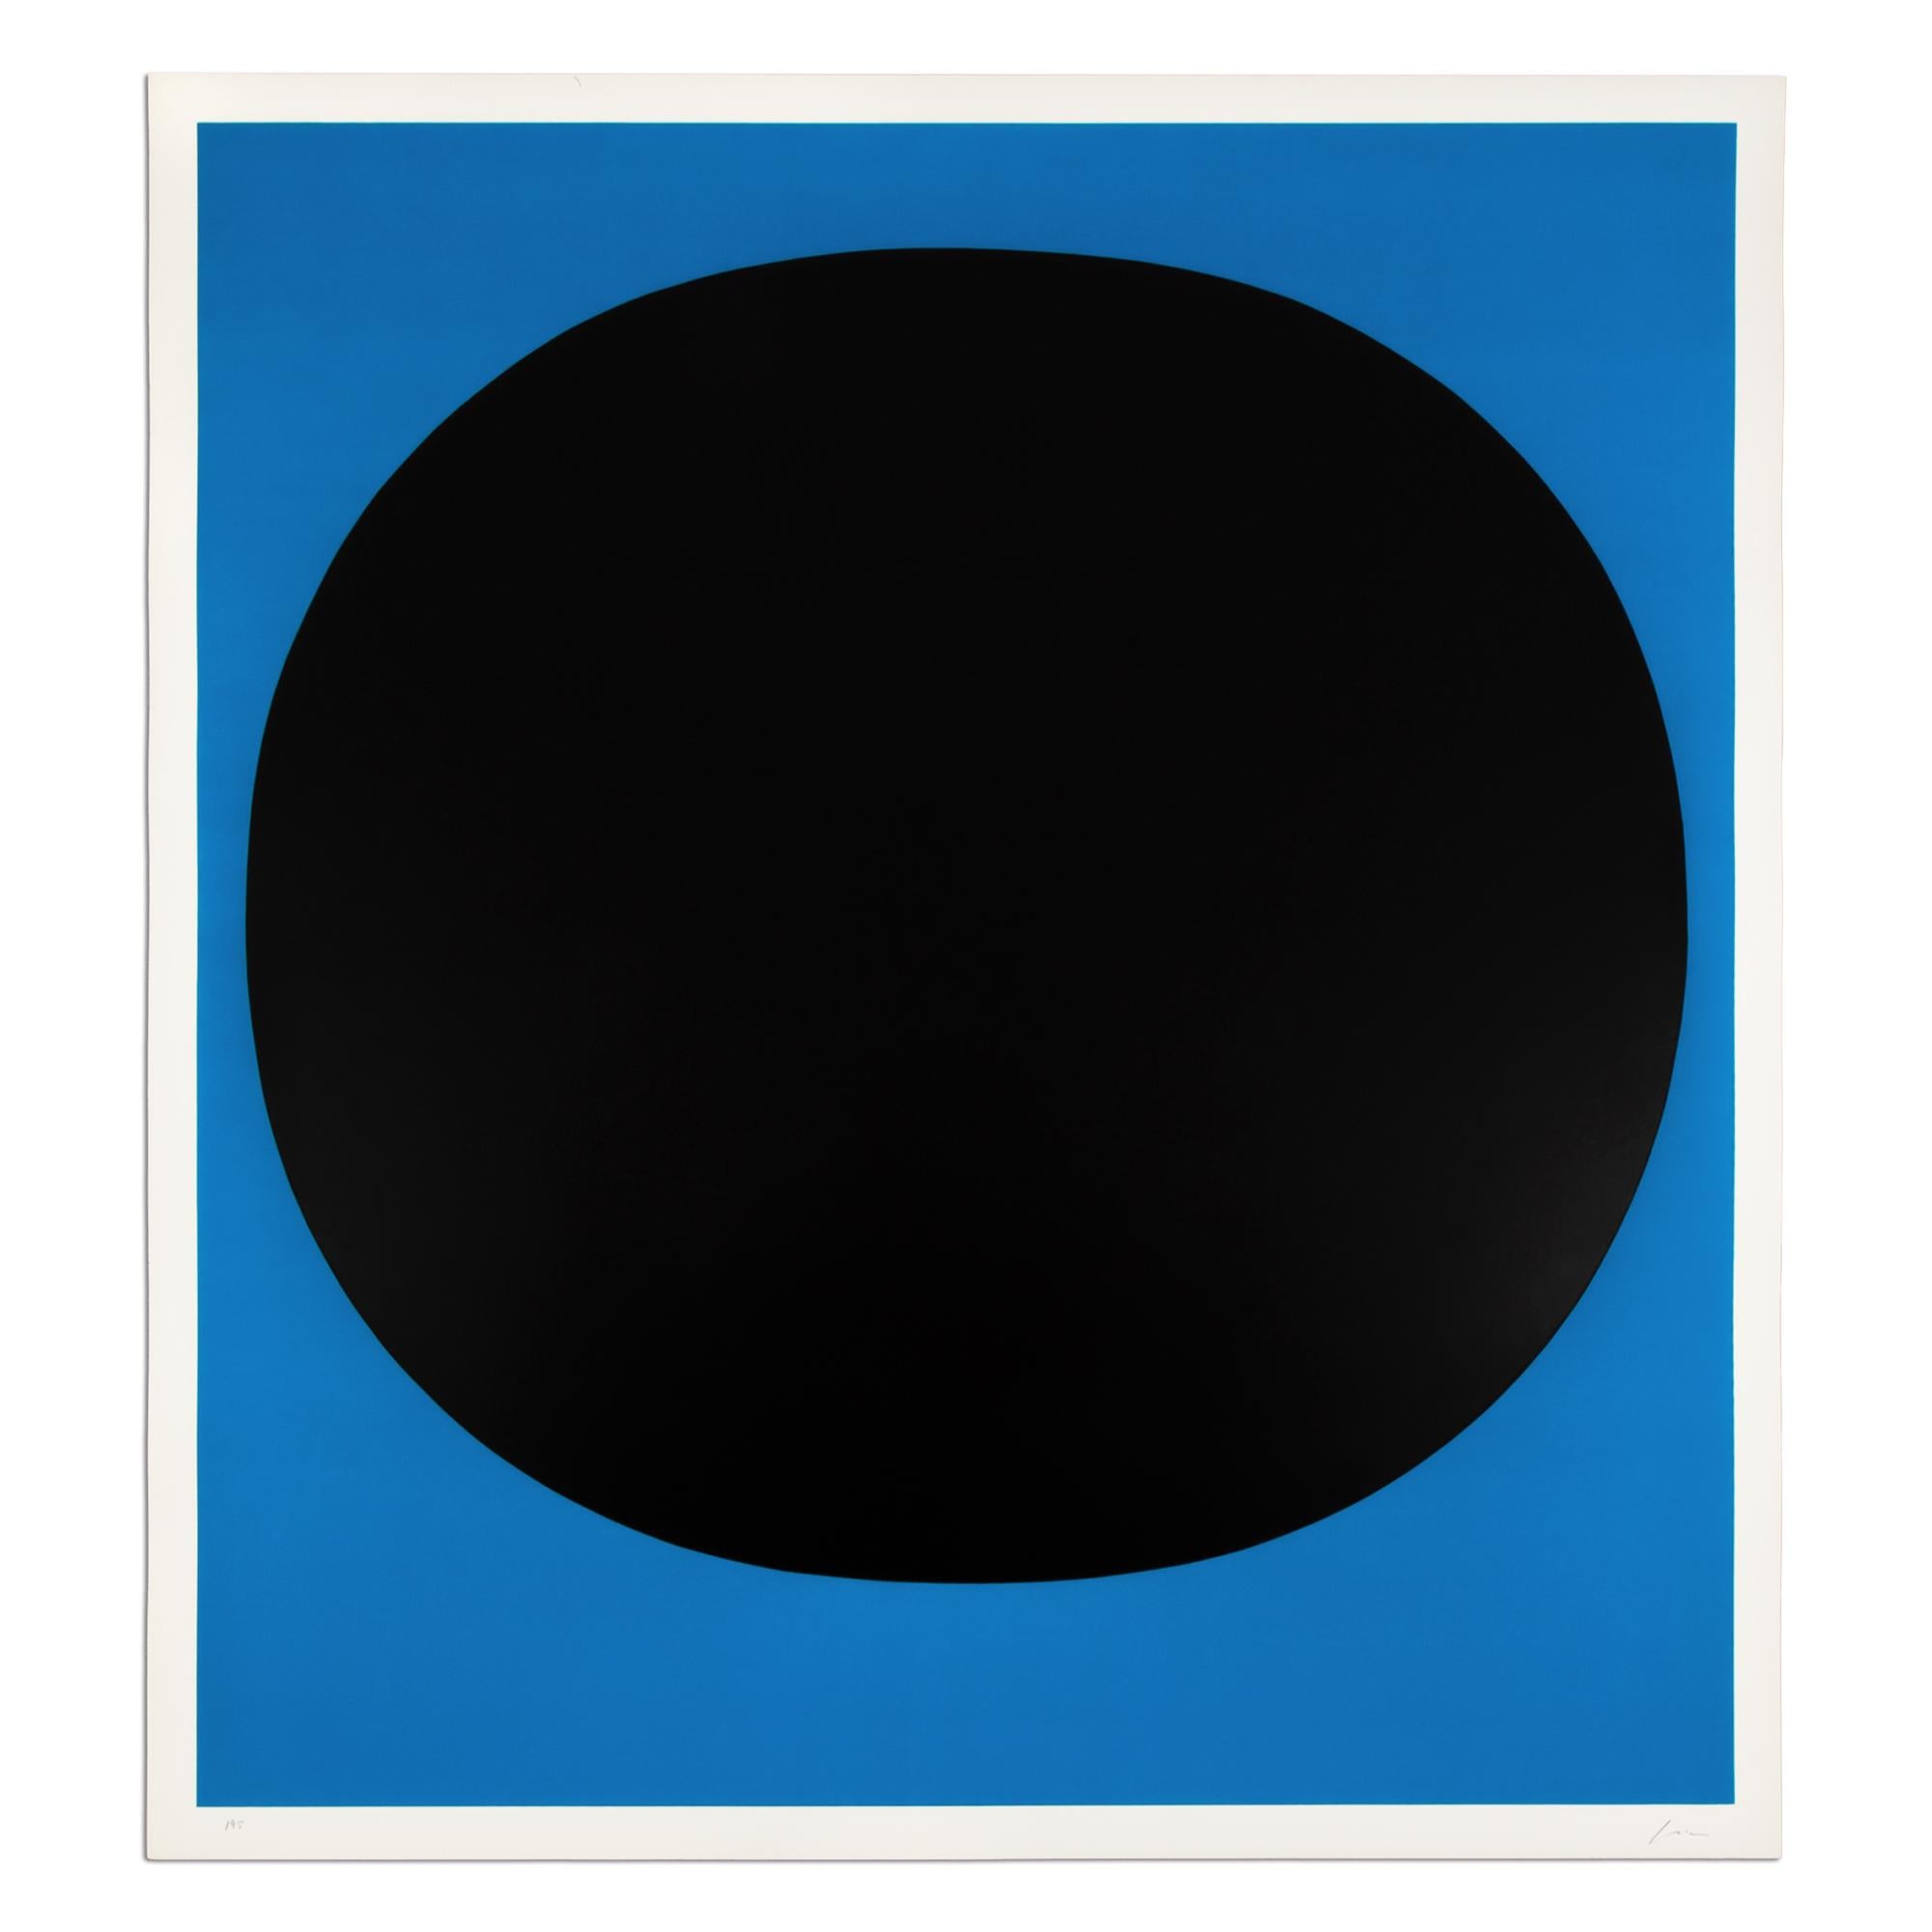 Rupprecht Geiger (German, 1908-2009)
Blue on Black (from "Colour in the Round"), 1969
Silkscreen in colours, on cardboard
Dimensions: 28 × 26 in (71 × 66 cm)
Edition of 95: Hand signed and numbered
Condition: Very good